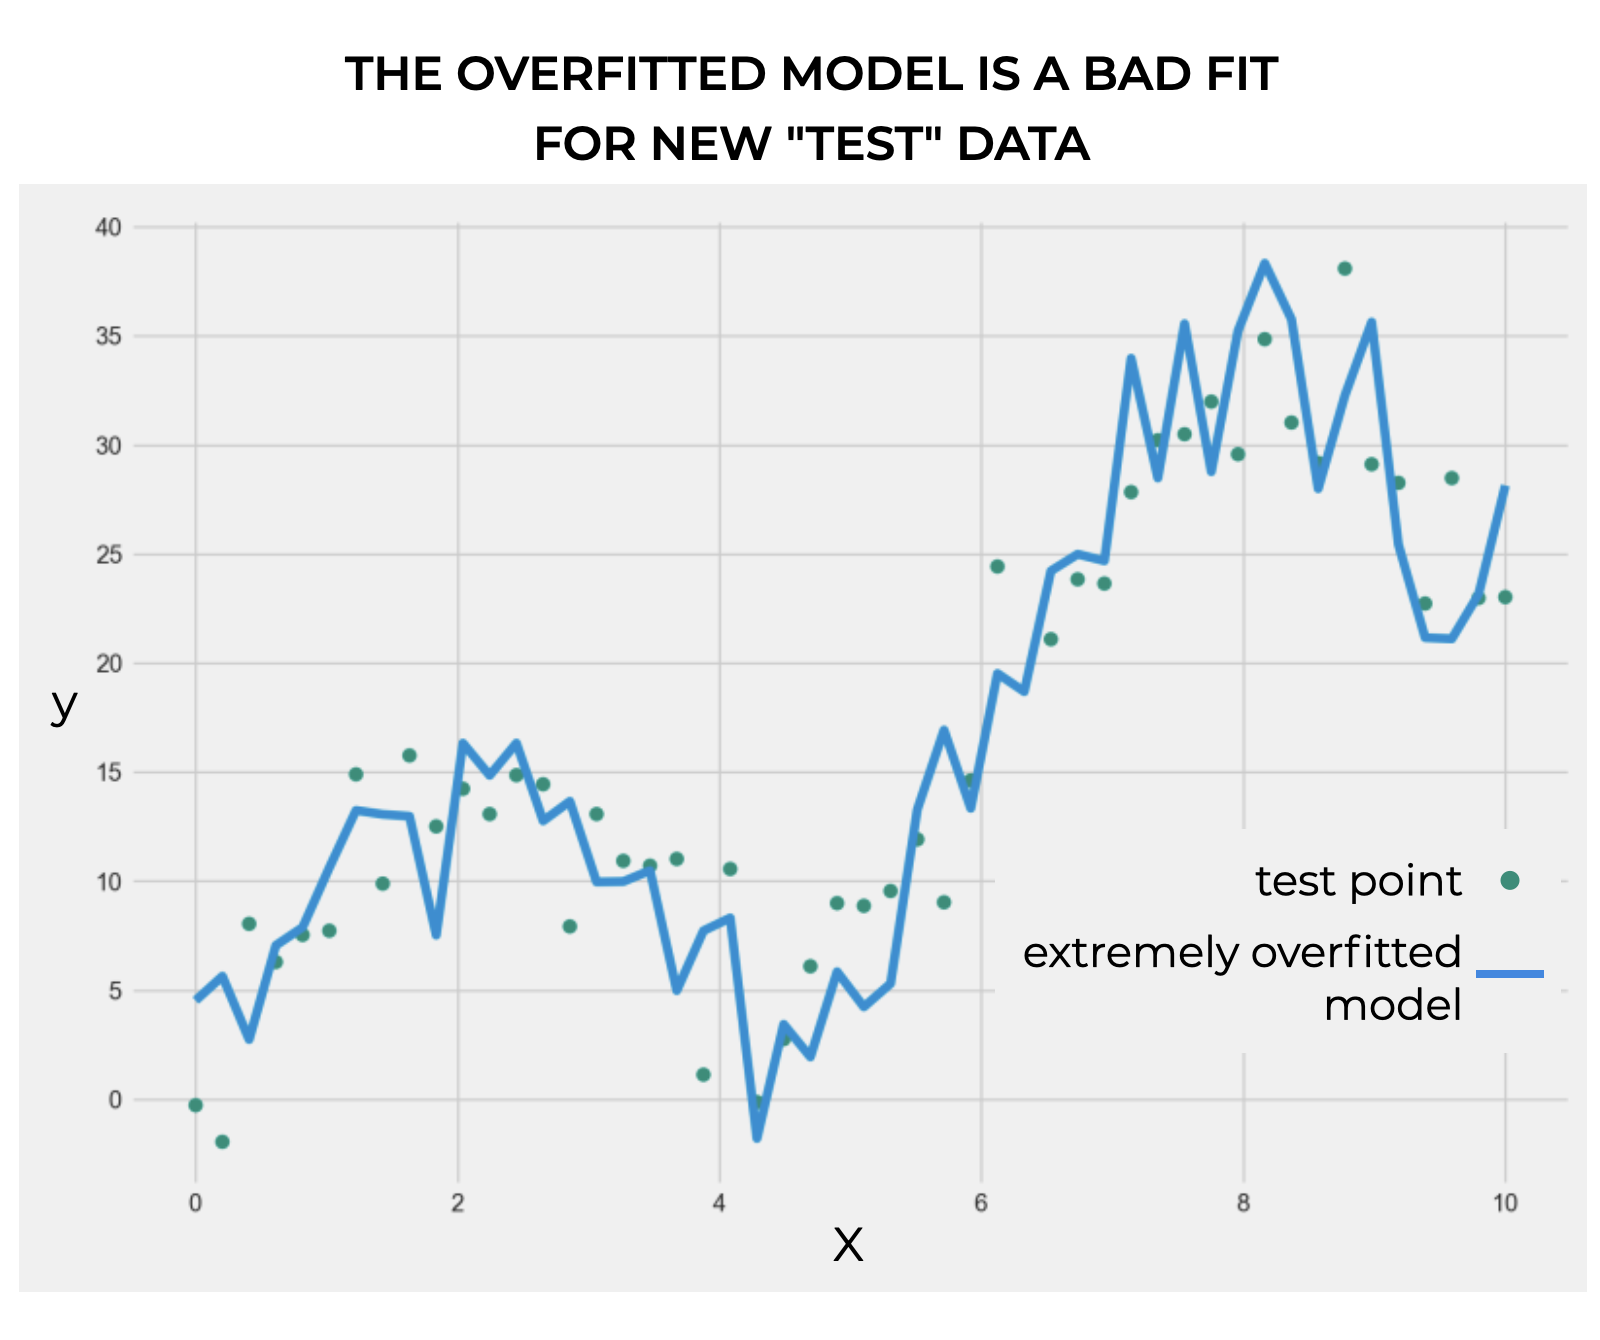 An image that shows the "overfitted" model that we created previously, now overlayed over new test data.  The model poorly fits the new, previously unseen test points.